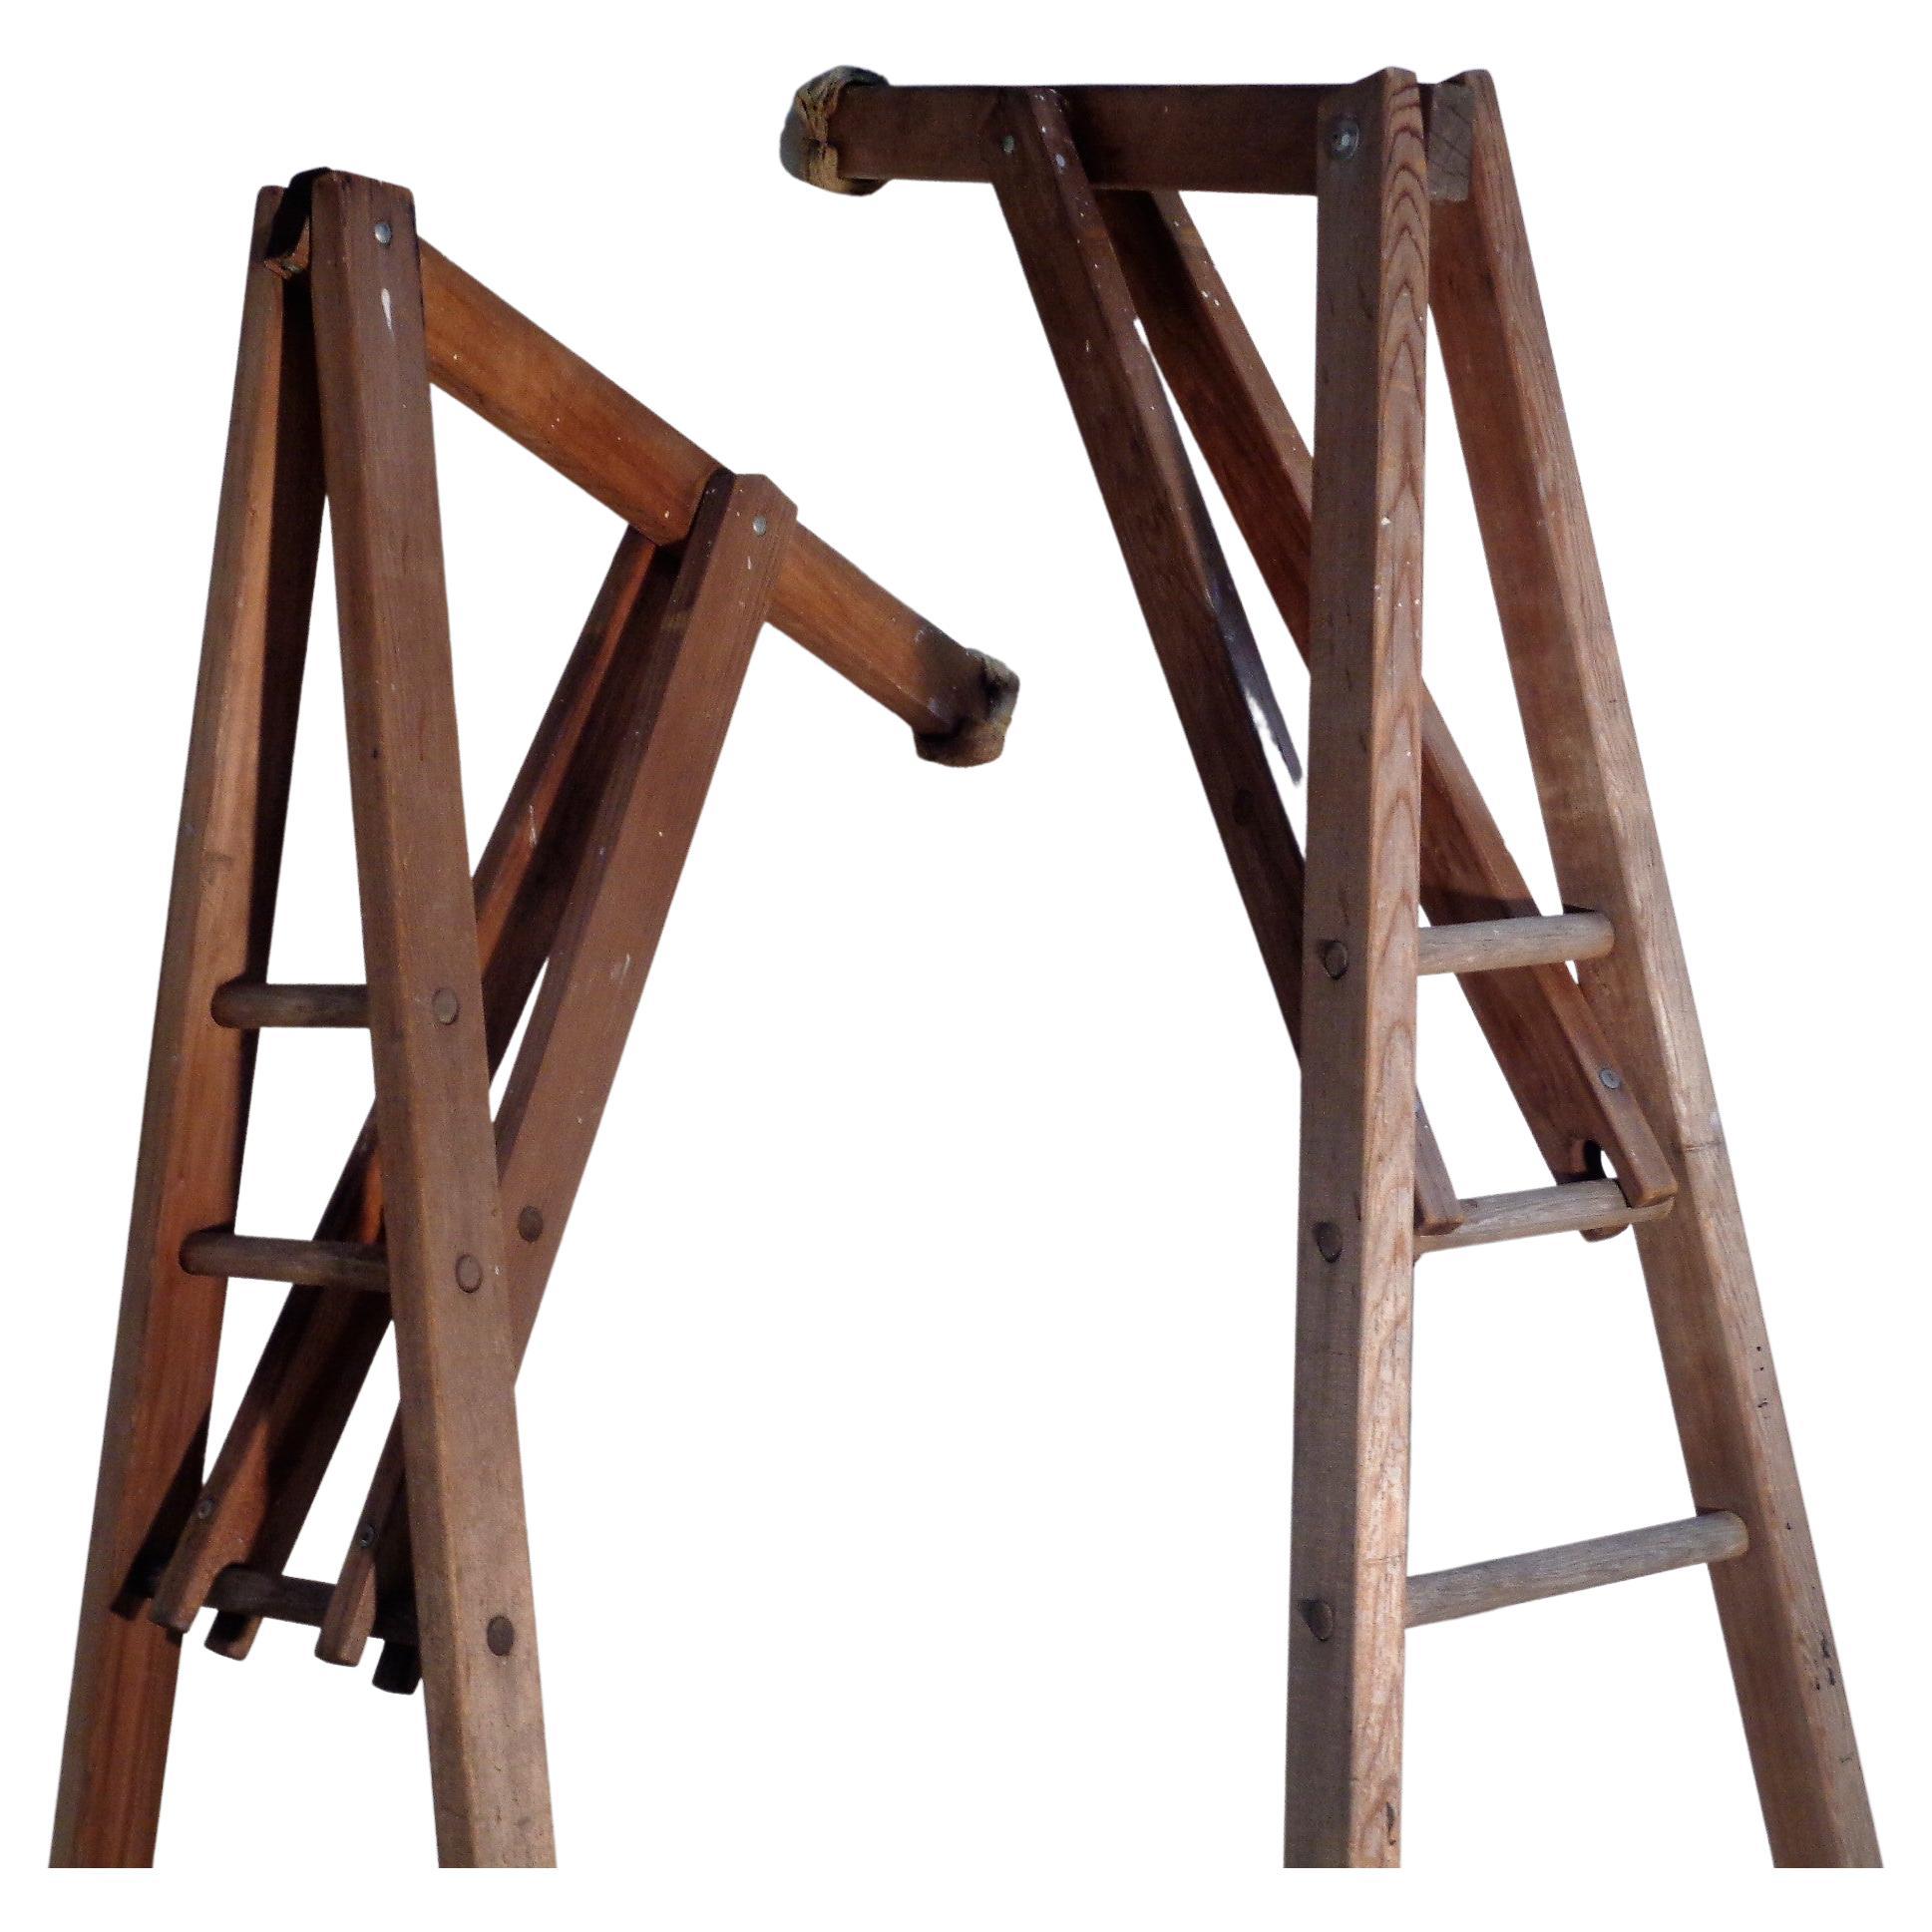 Unusual Old Peak Top Adjustable Arm Orchard Ladders In Good Condition For Sale In Rochester, NY